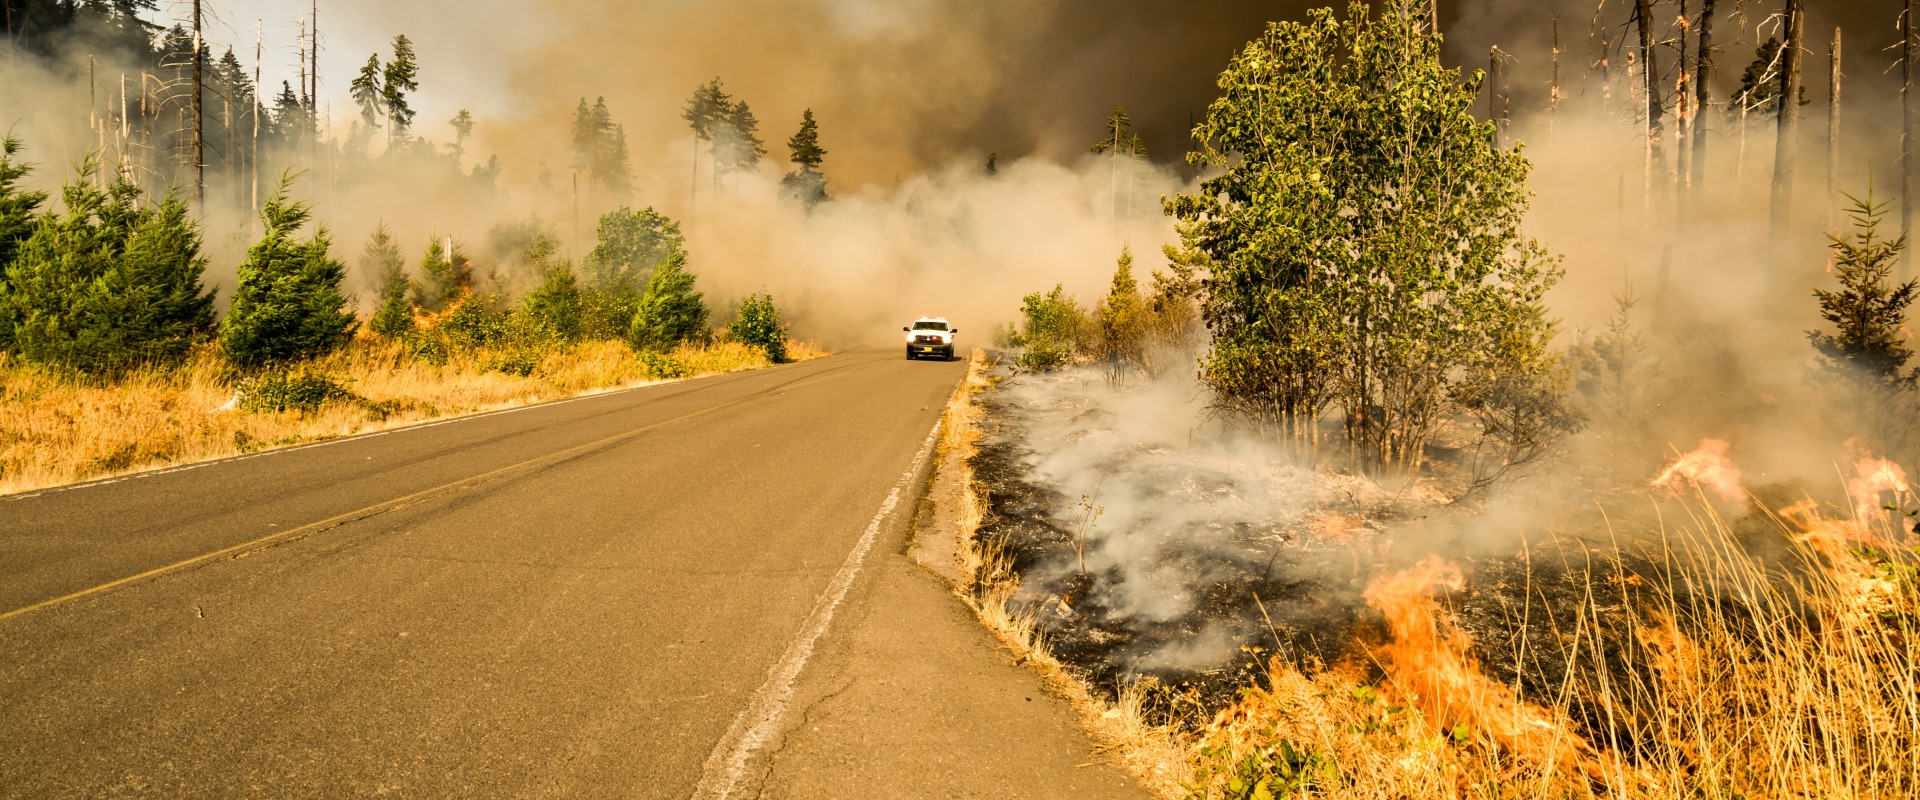 What States Have the Most Wildfires? Secure Your Home's Air Quality With Duct Sealing Service